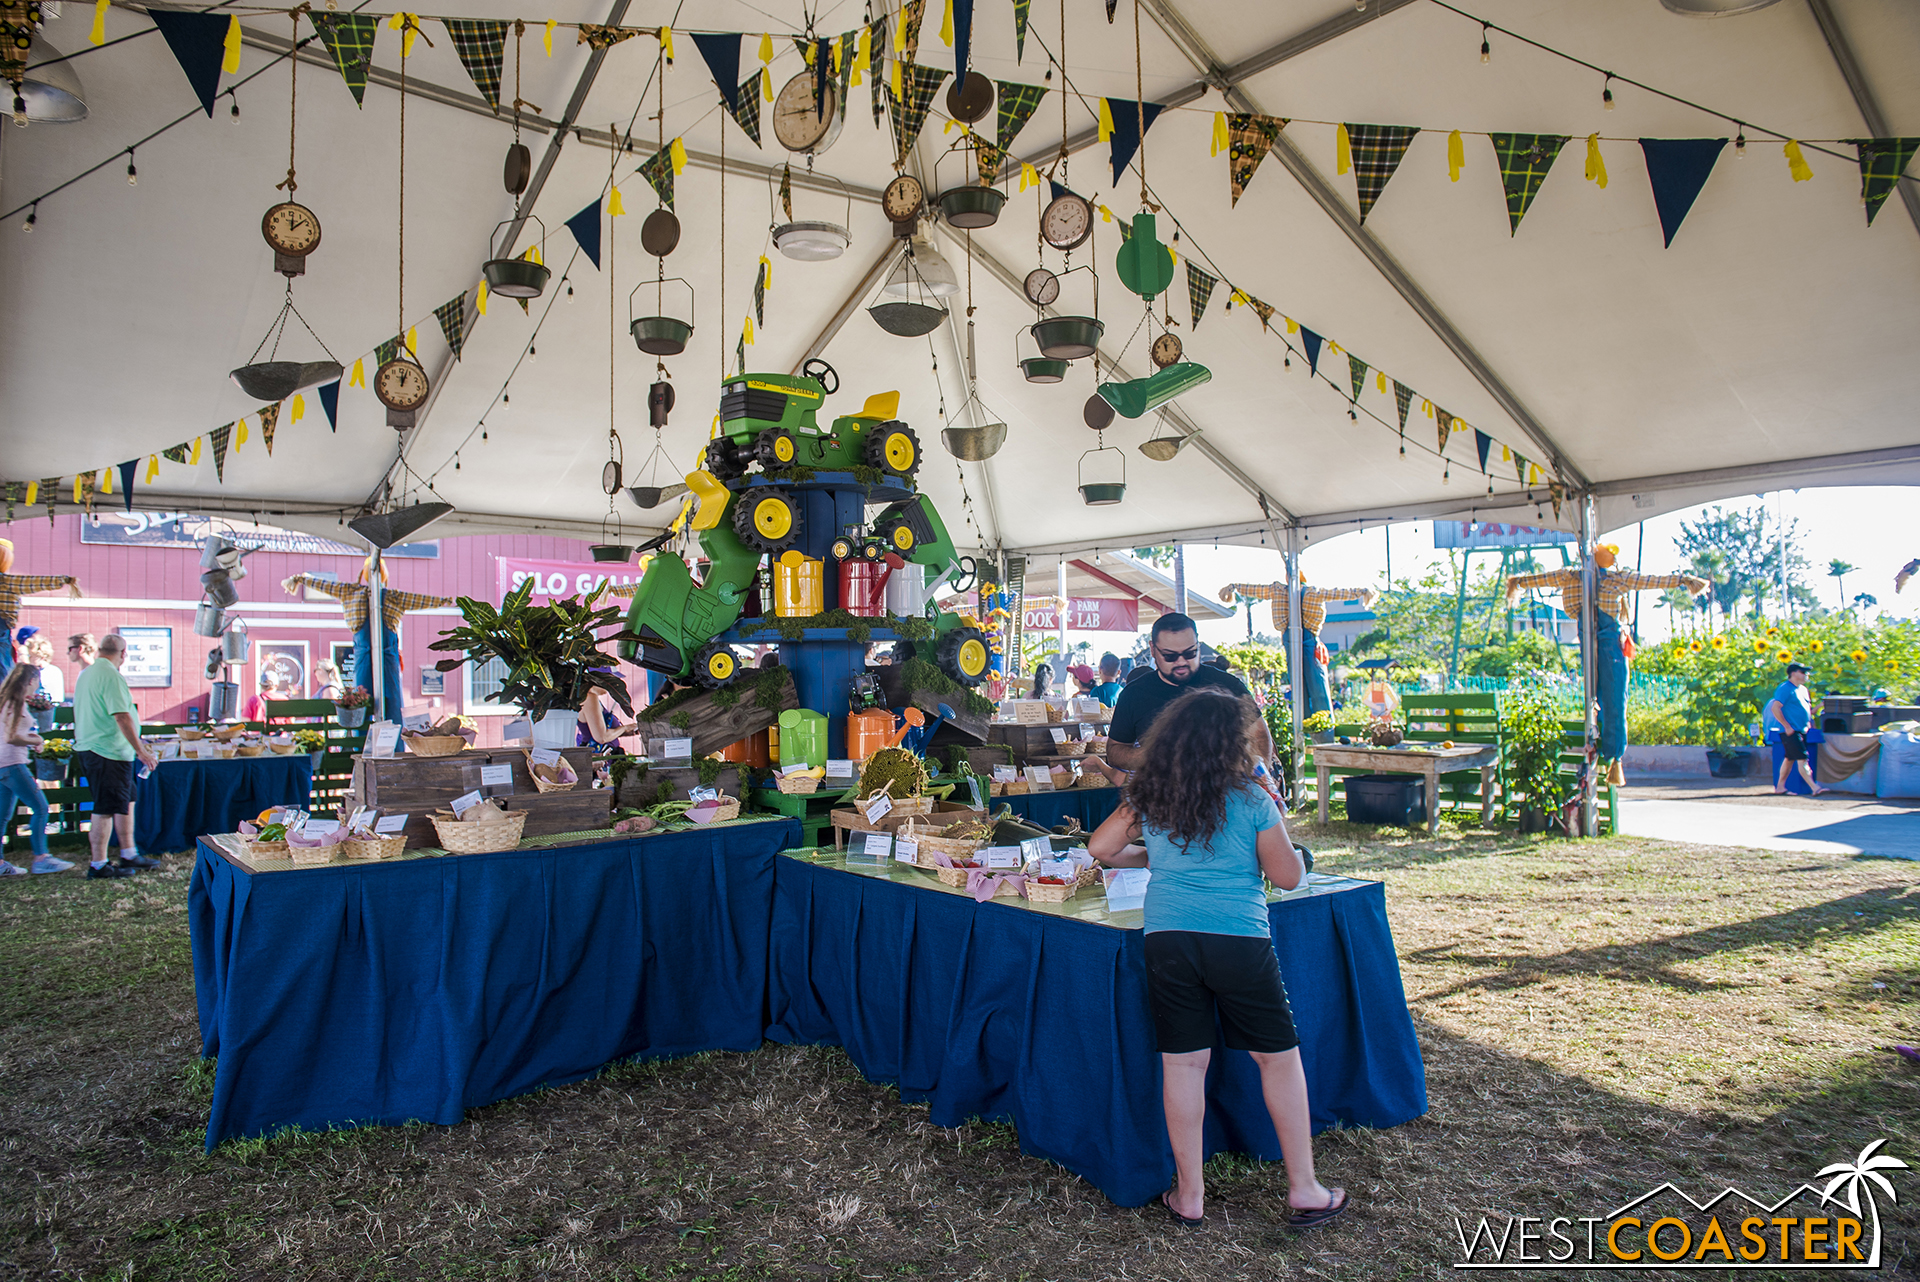  Moving over to Centennial Farms, the fruit and vegetable competitions can be found on display. 